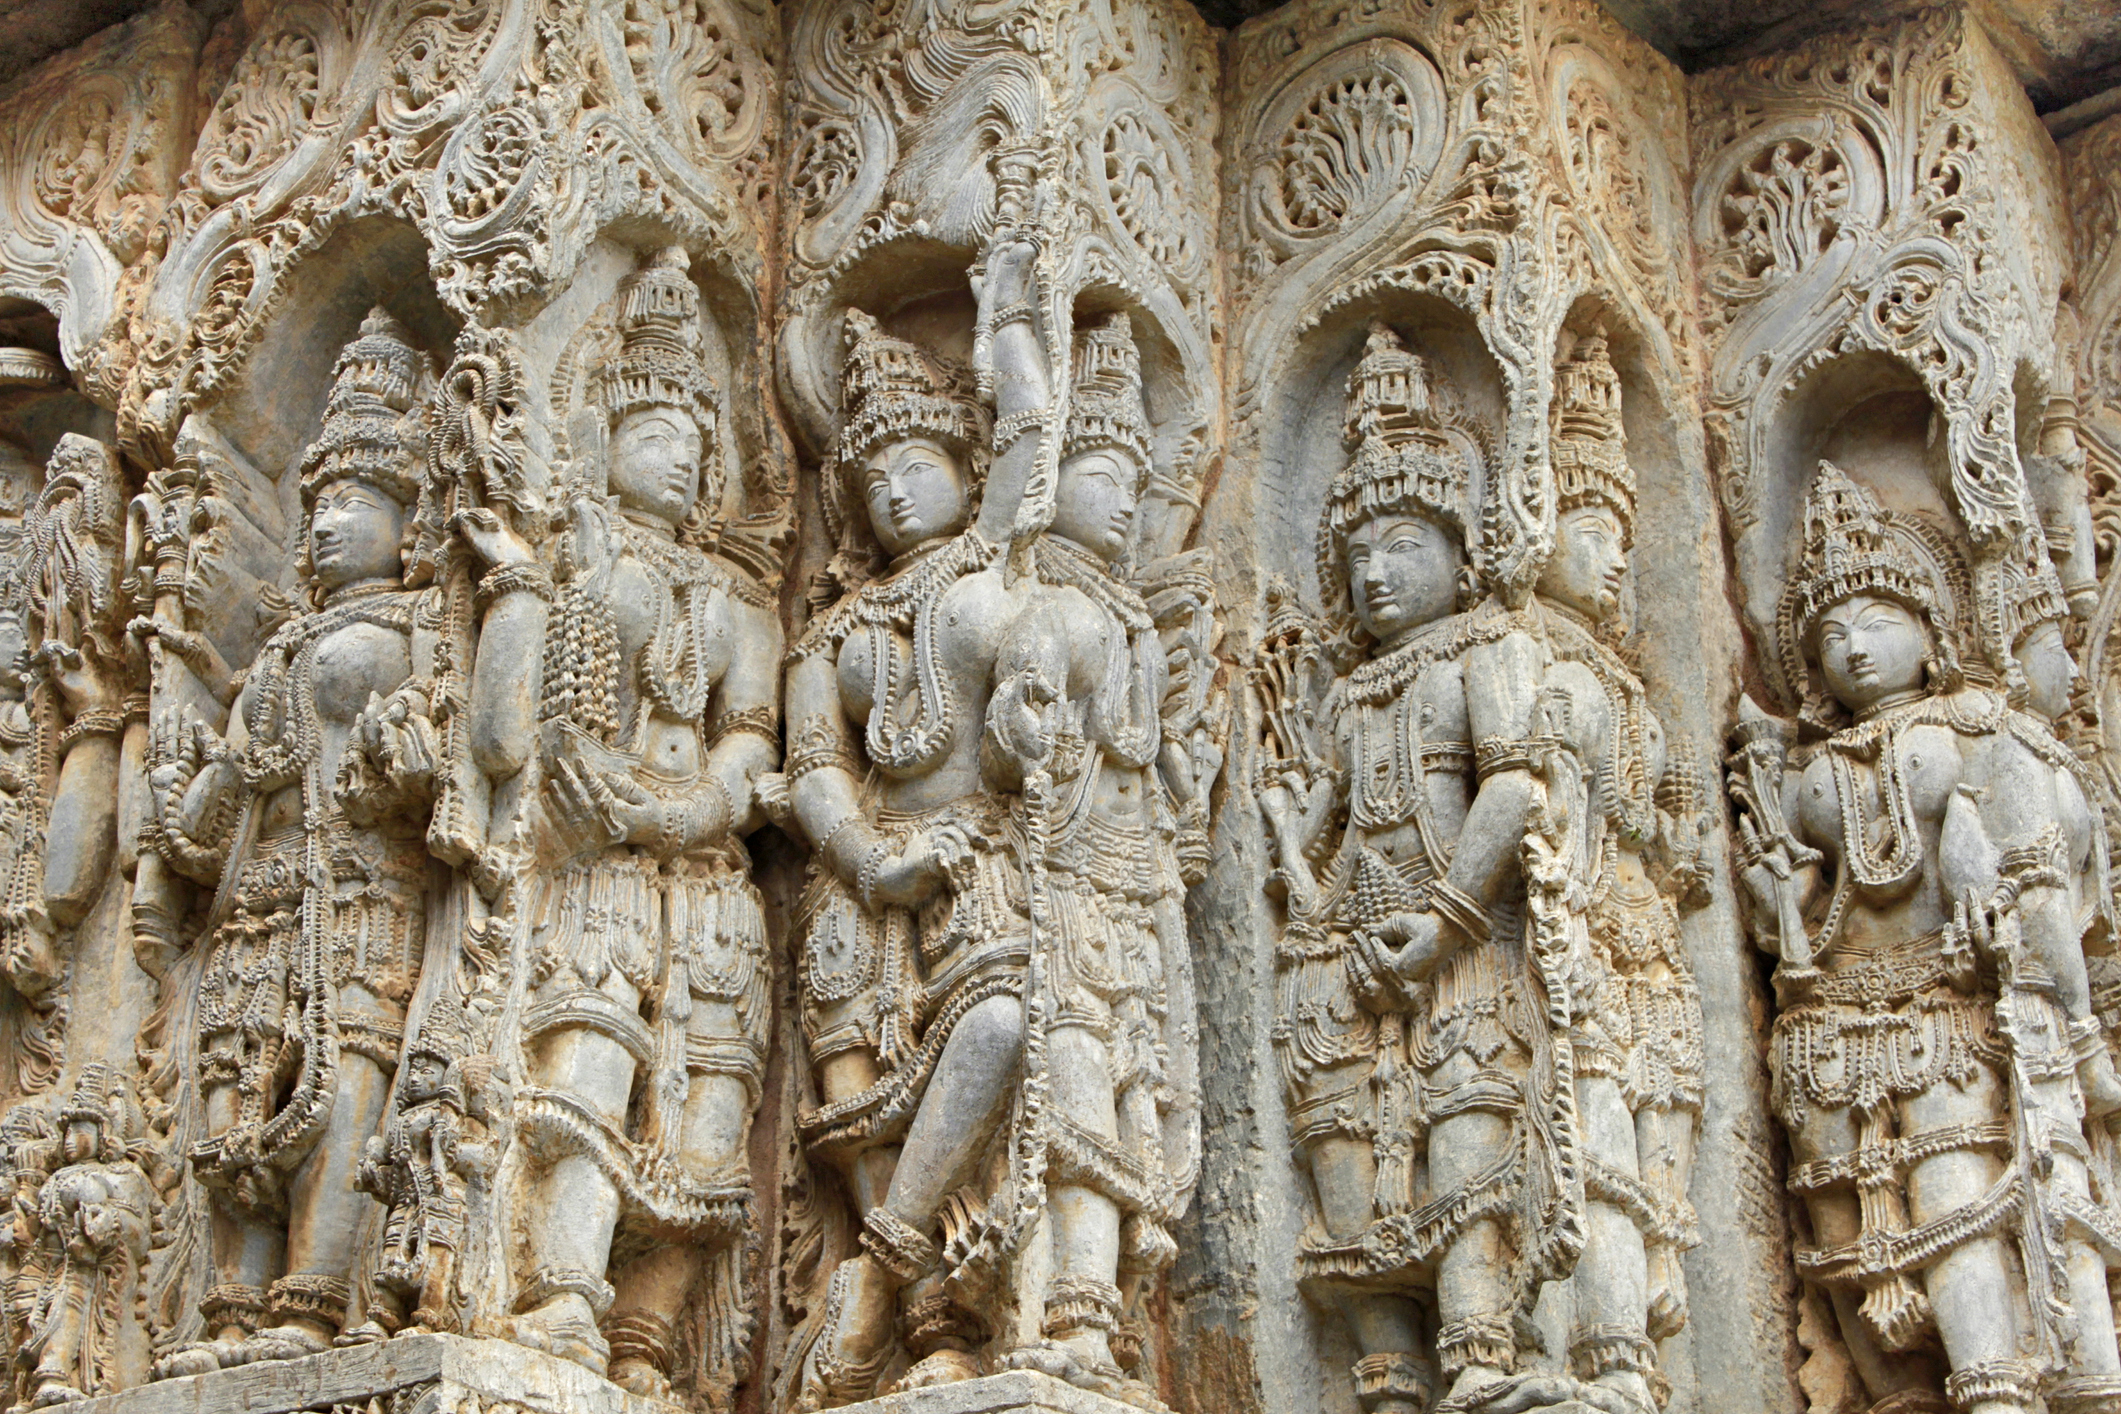 Experience extraordinary Indian sights like these carved walls at Hoysaleswara temple in Hassan when you take a tailor-made holiday with Alfred&.